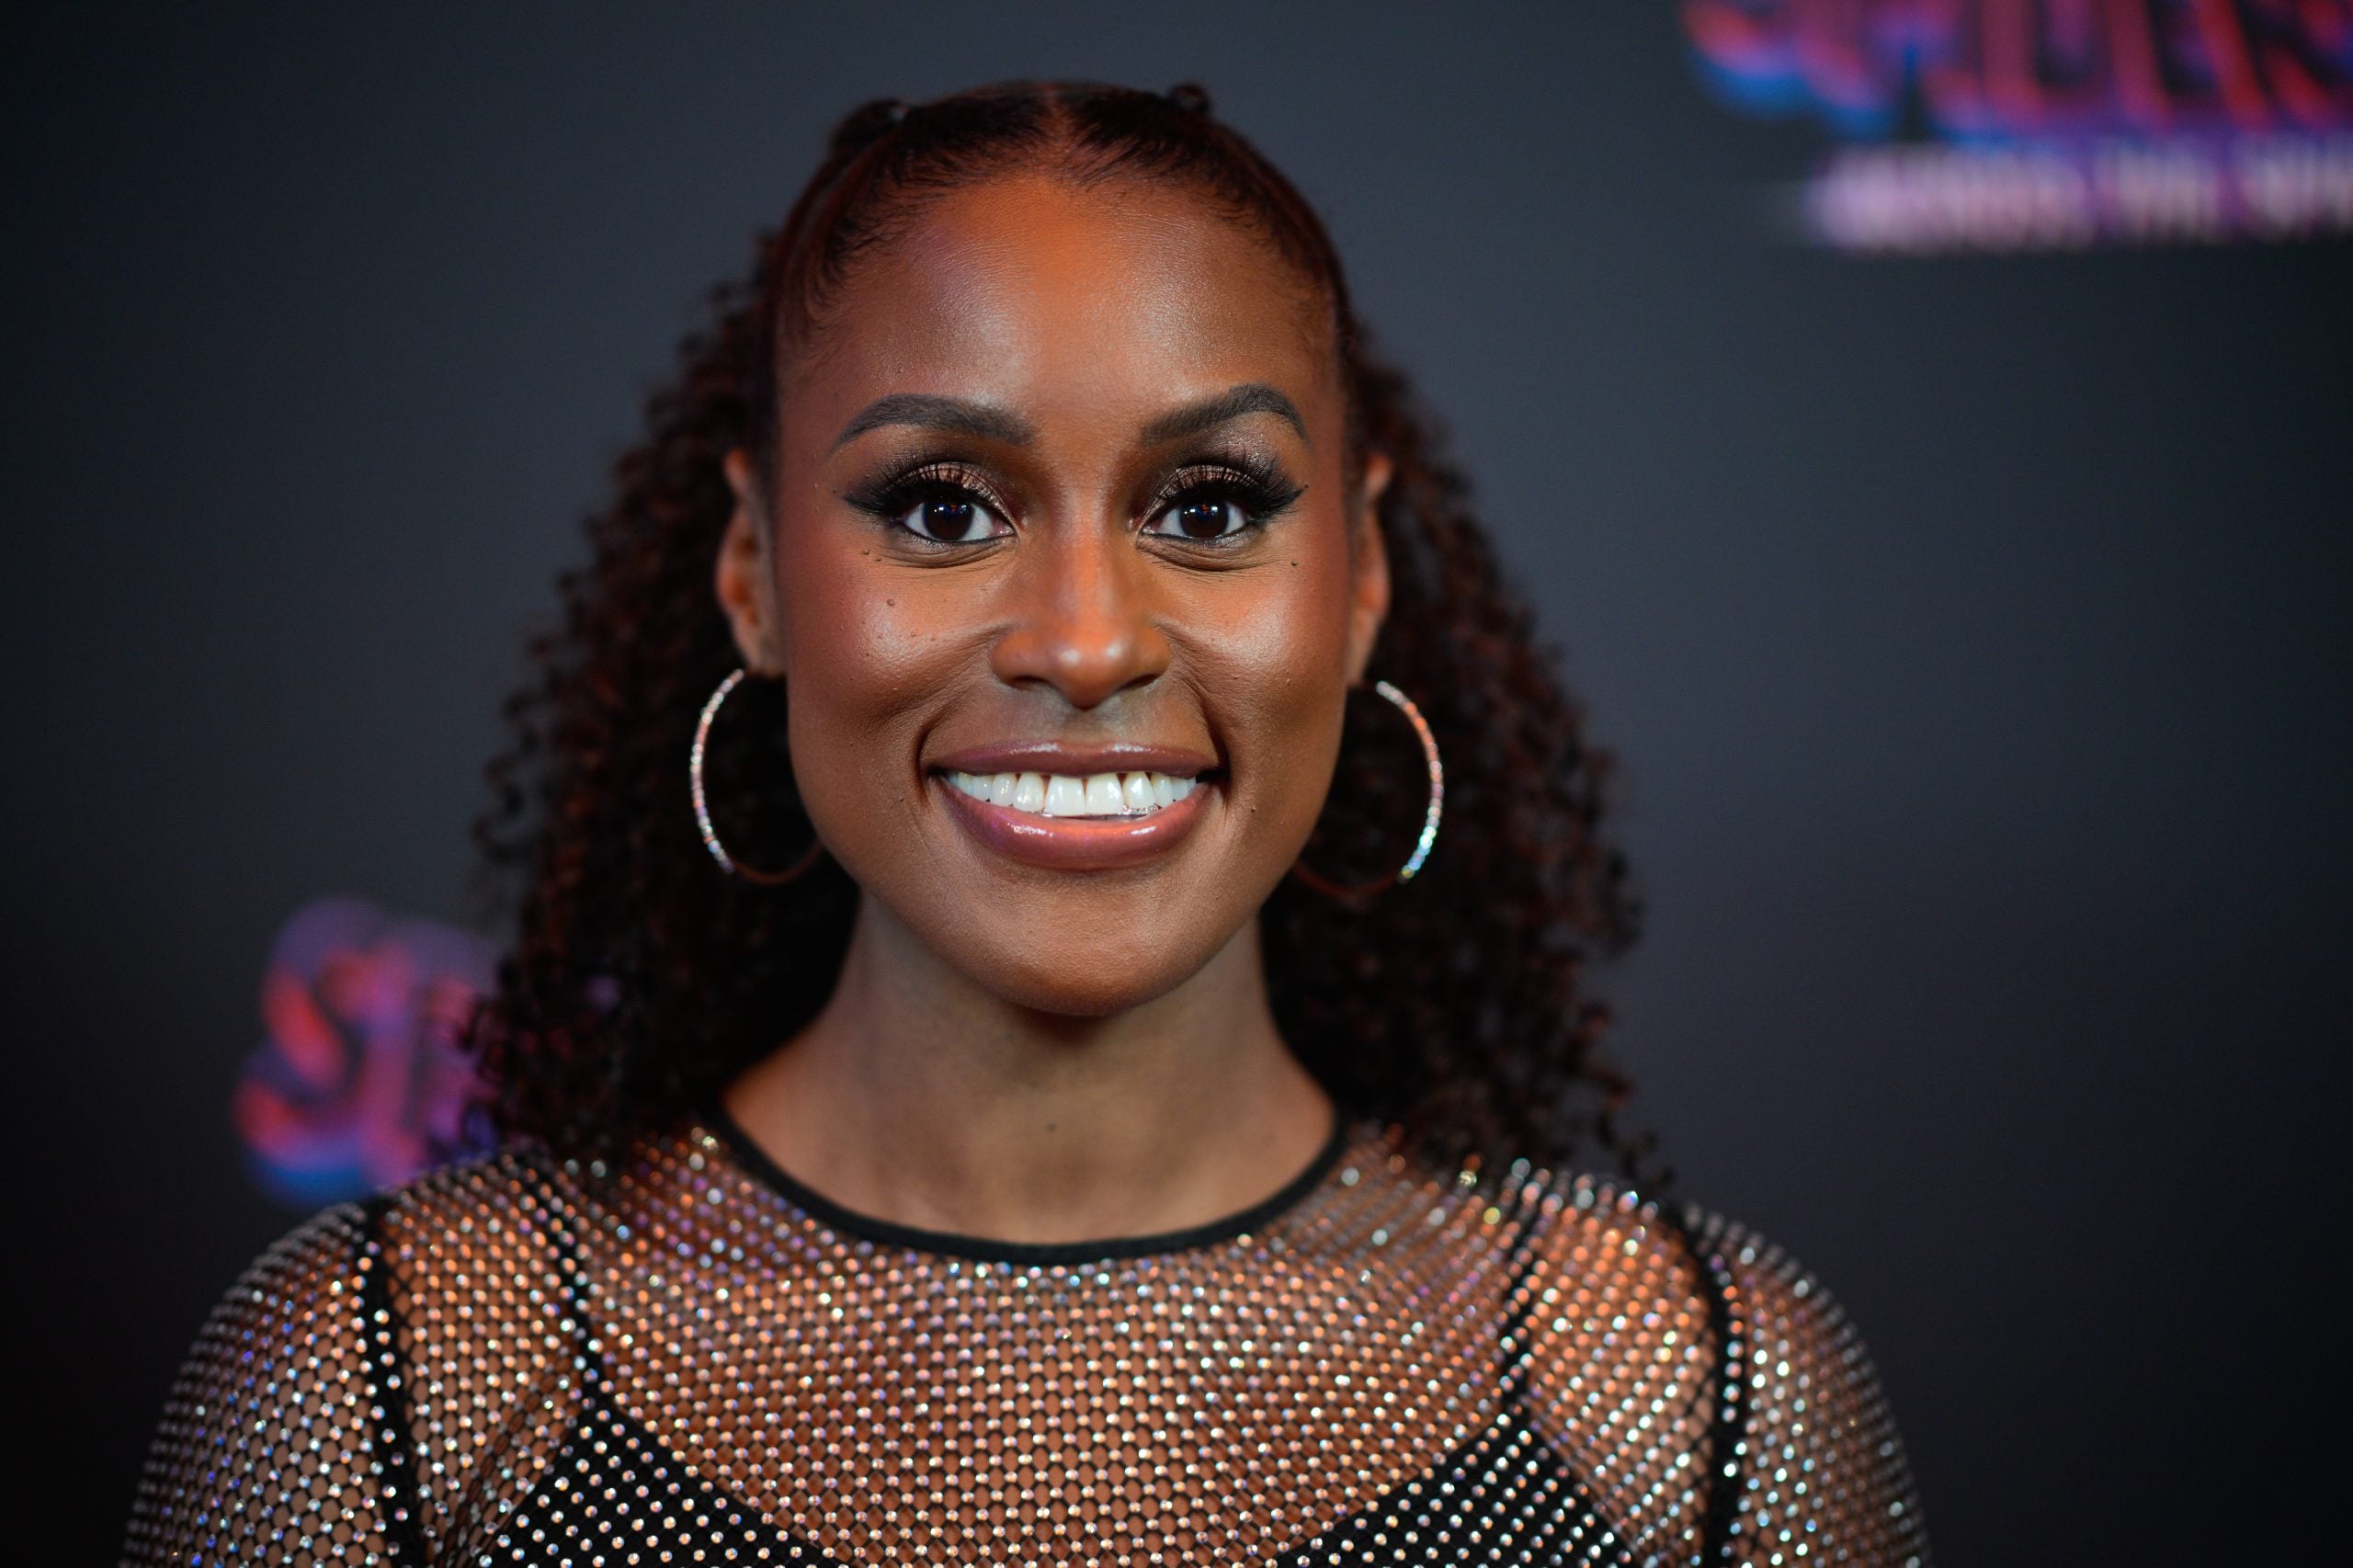 Issa Rae Expands Her “Hoorae” Media Empire To Marketing